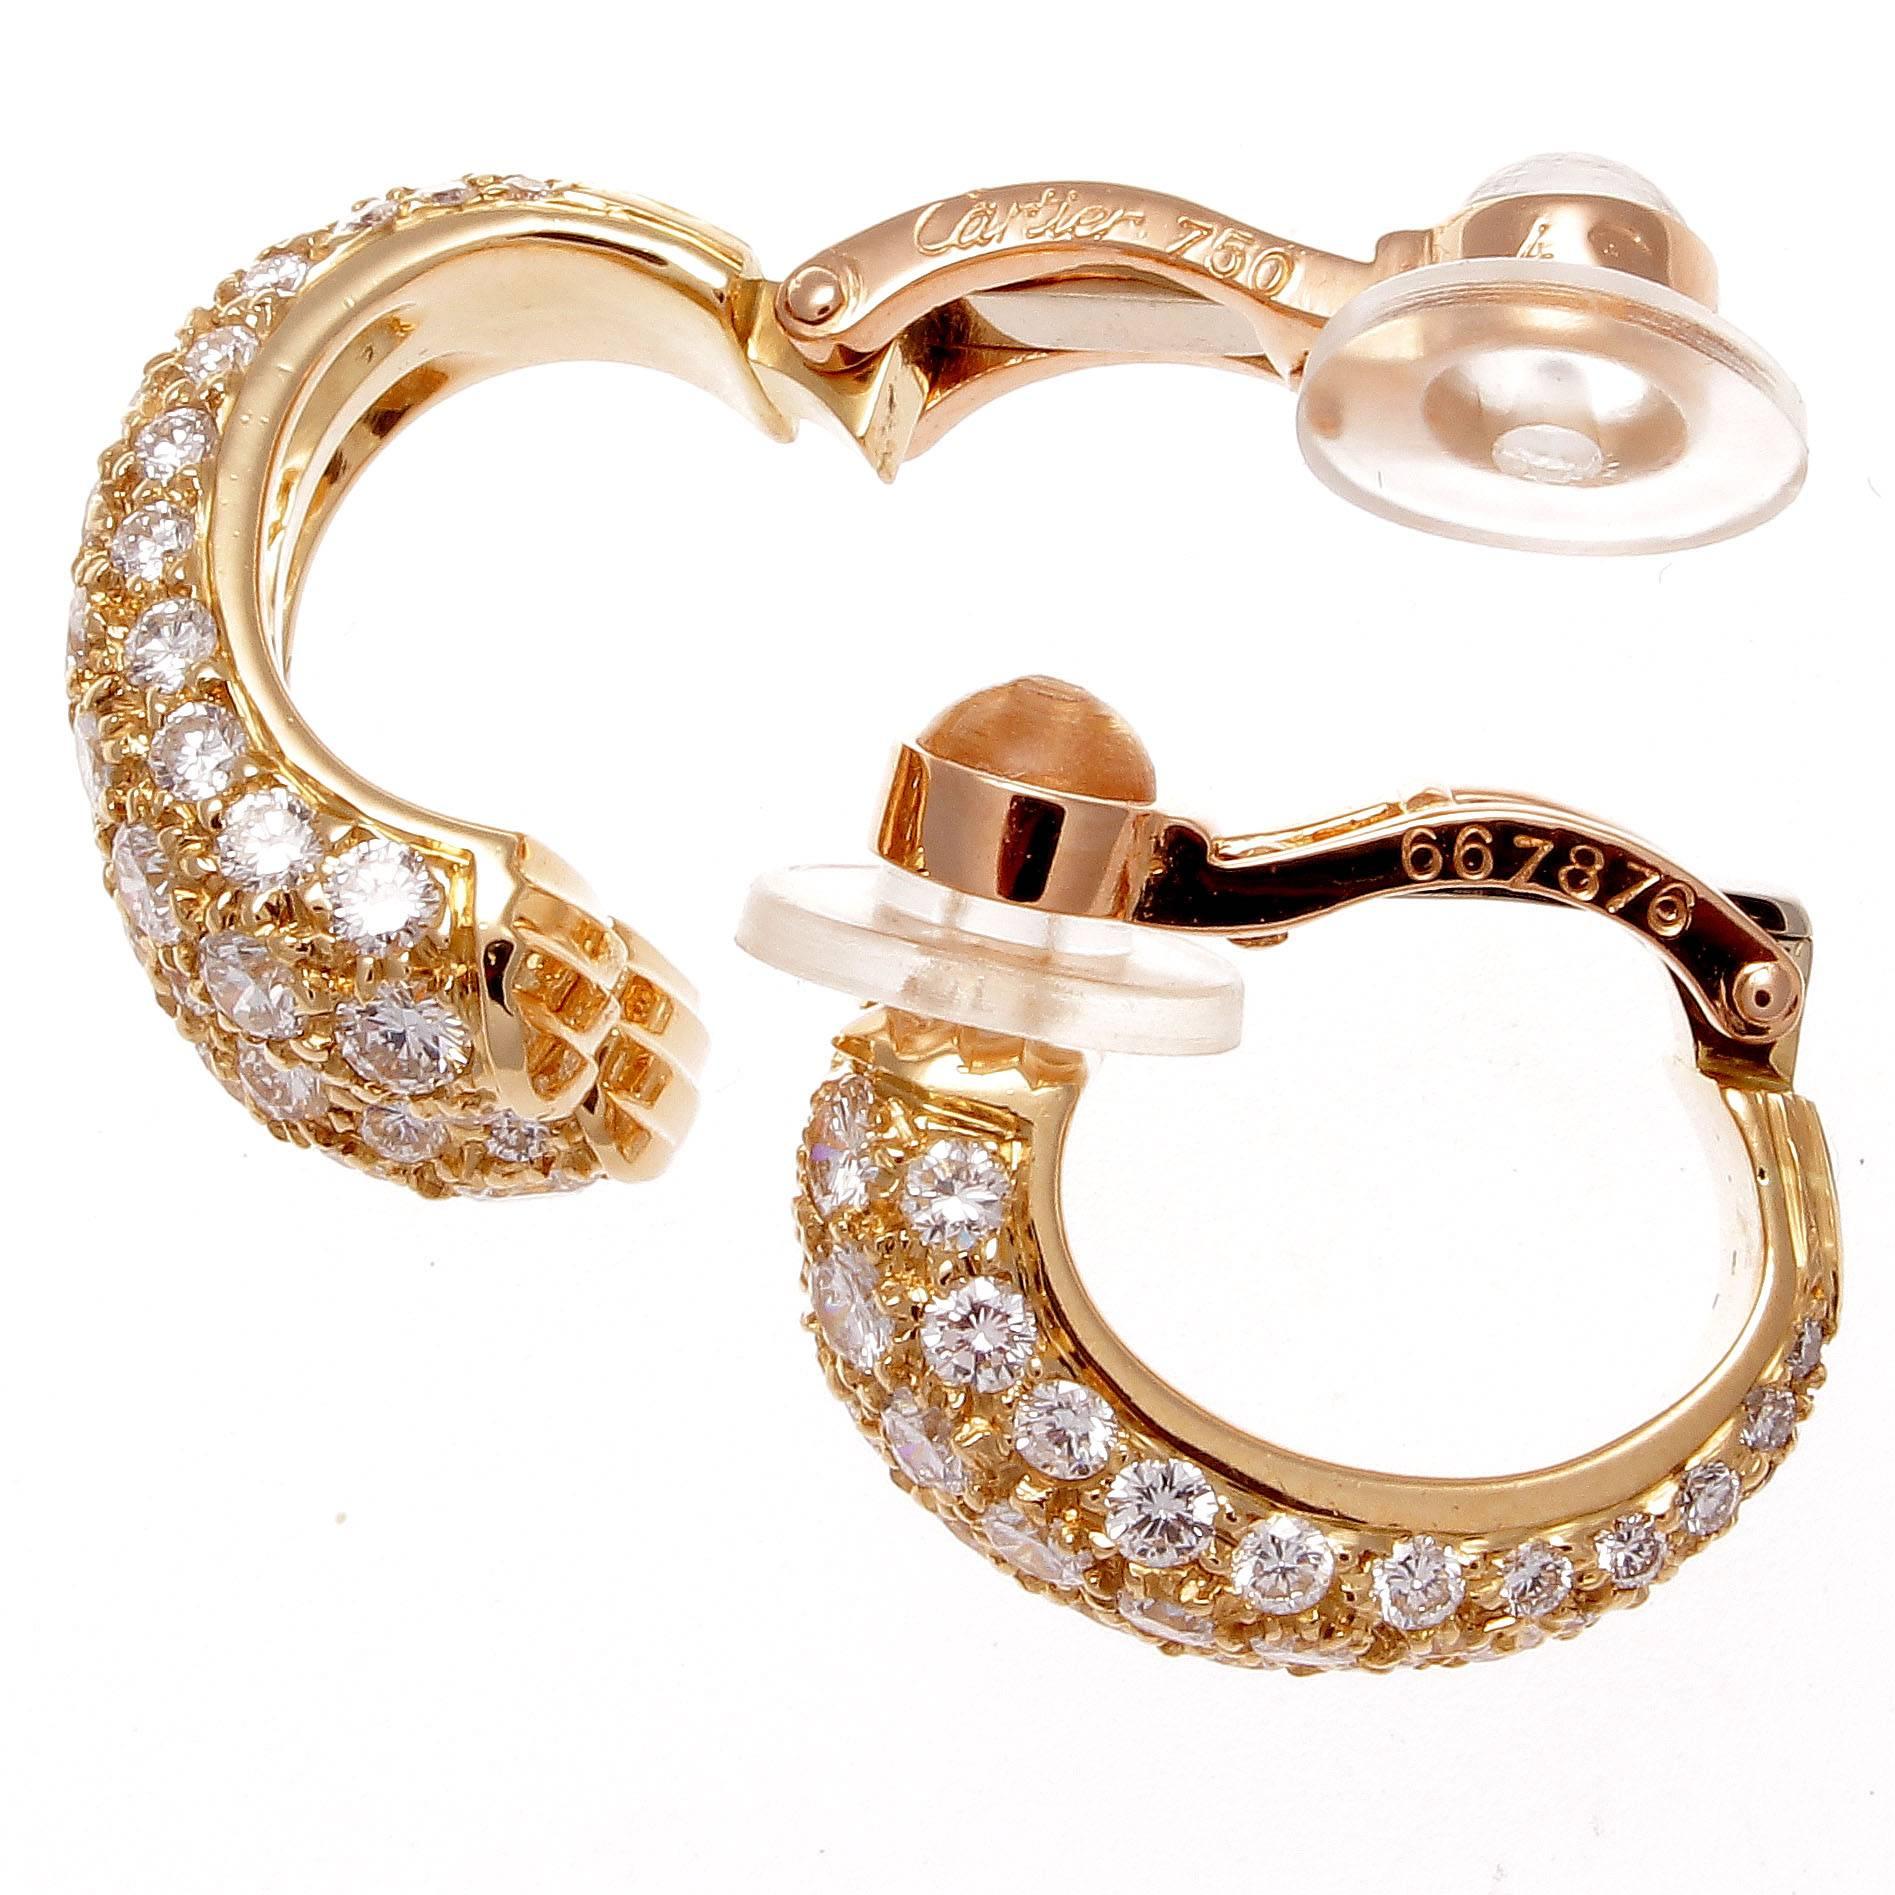 Cartier's creativity has always been rooted in its elegant designs. Designed with spiraling diamonds flowing down the double sided 18k gold earrings. Signed Cartier and numbered.